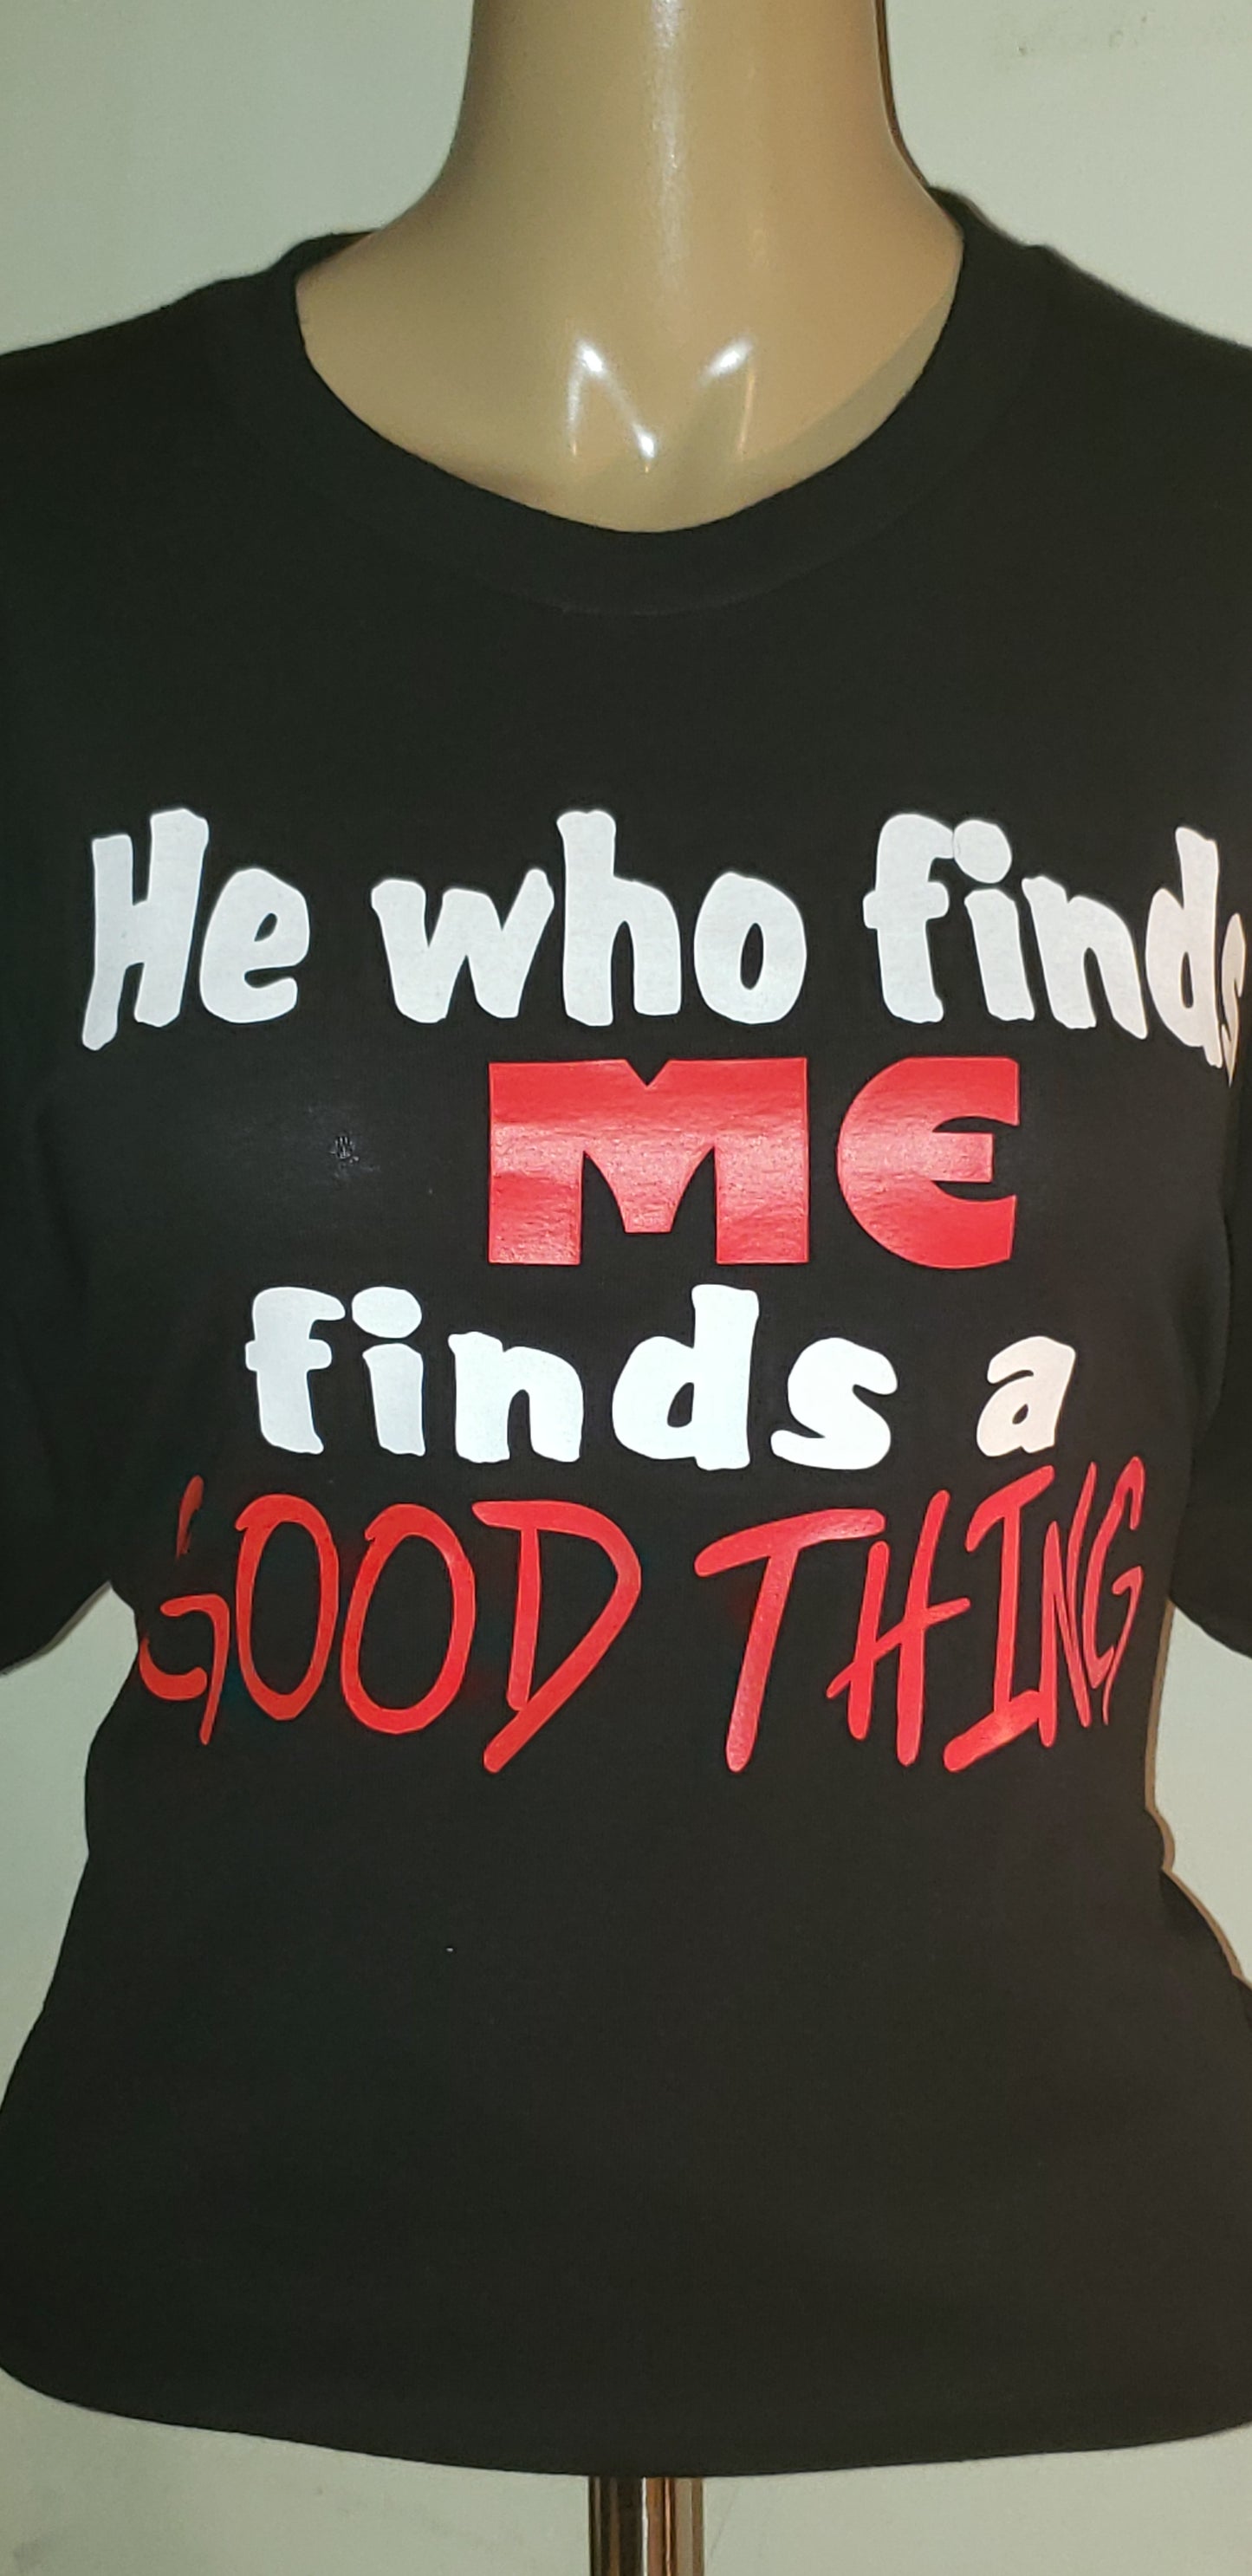 He who finds ME finds a GOOD THING